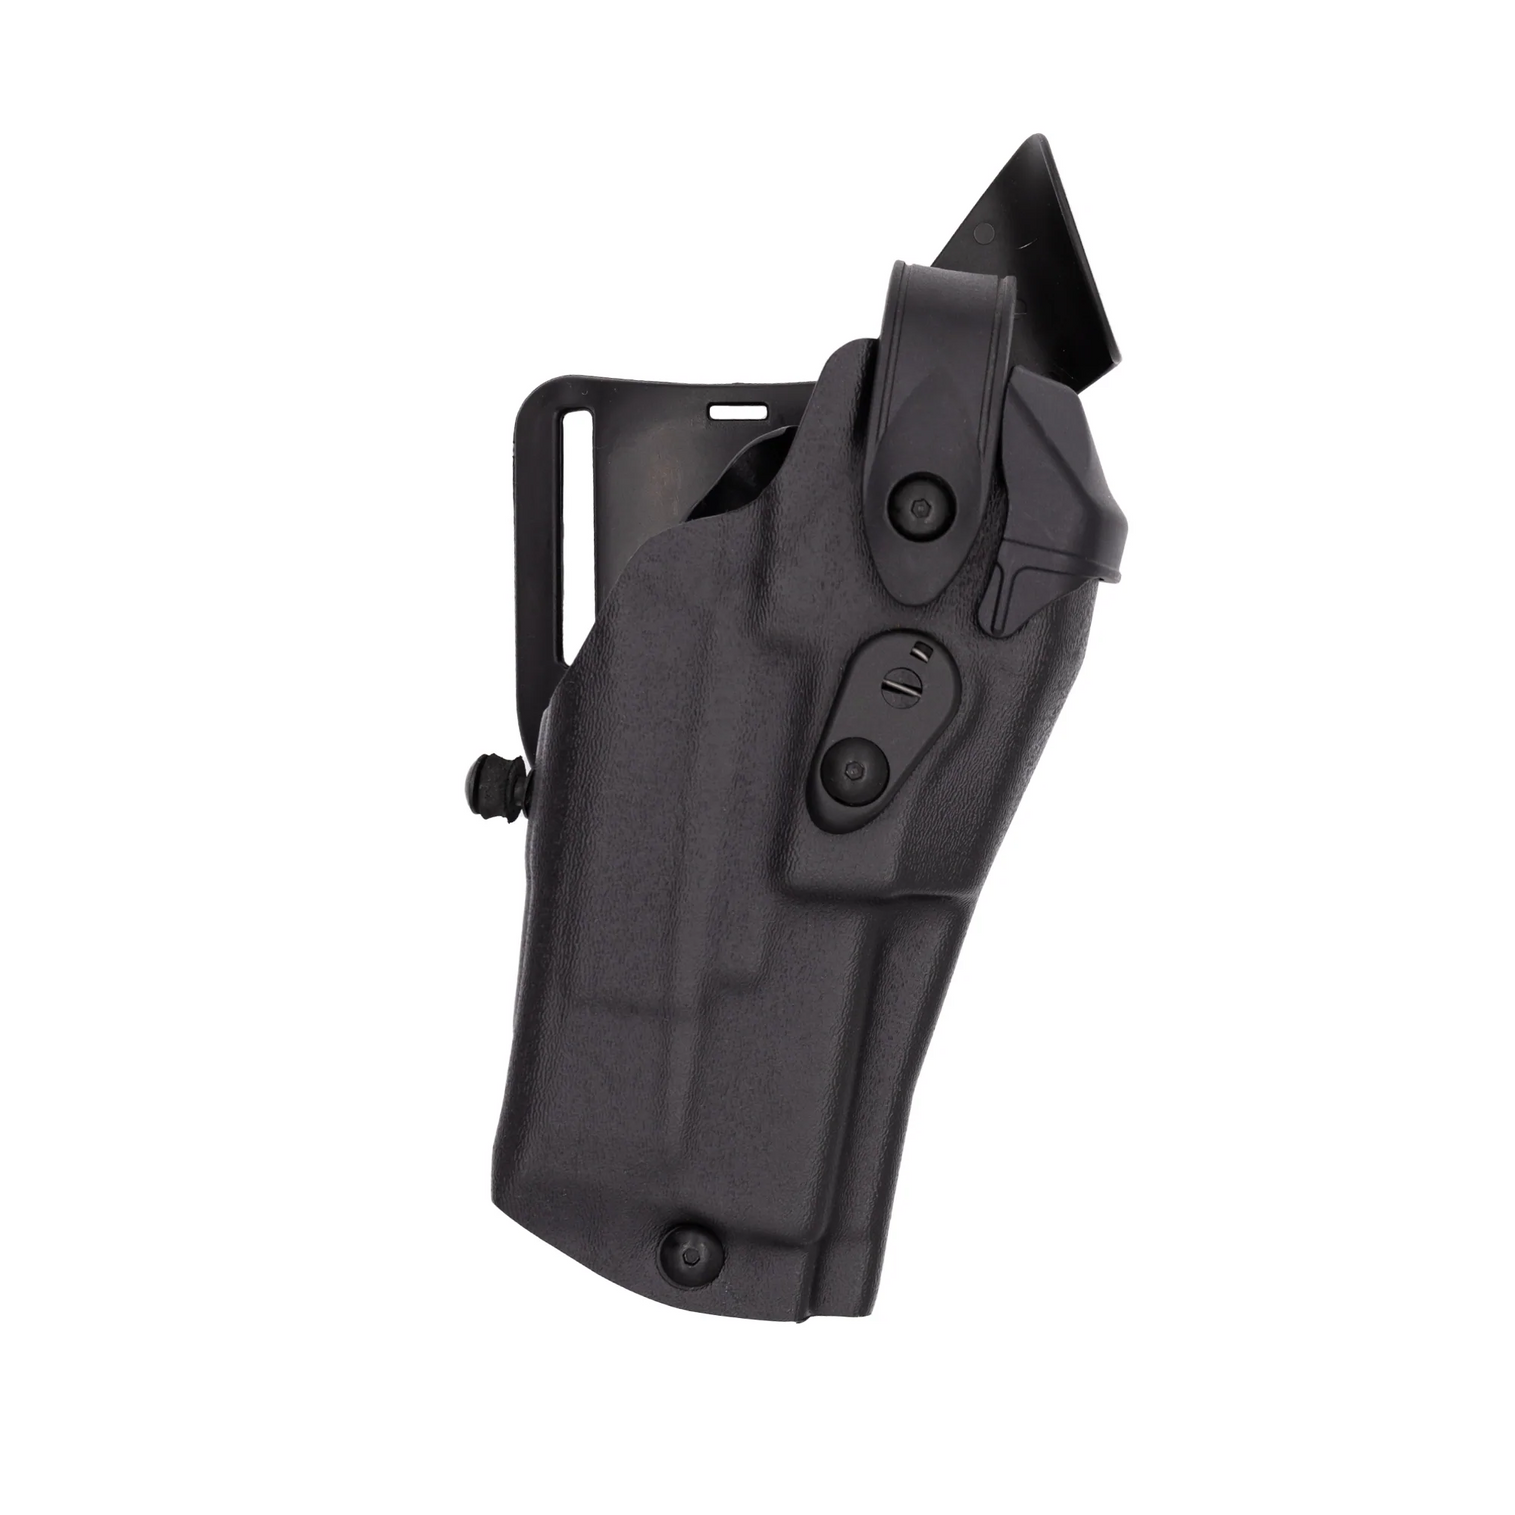 Model 6360rds Als/sls Mid-ride, Level Iii Retention Duty Holster For Sig Sauer P320 Rx 9 W/ Light - KR6360RDS-4502-491